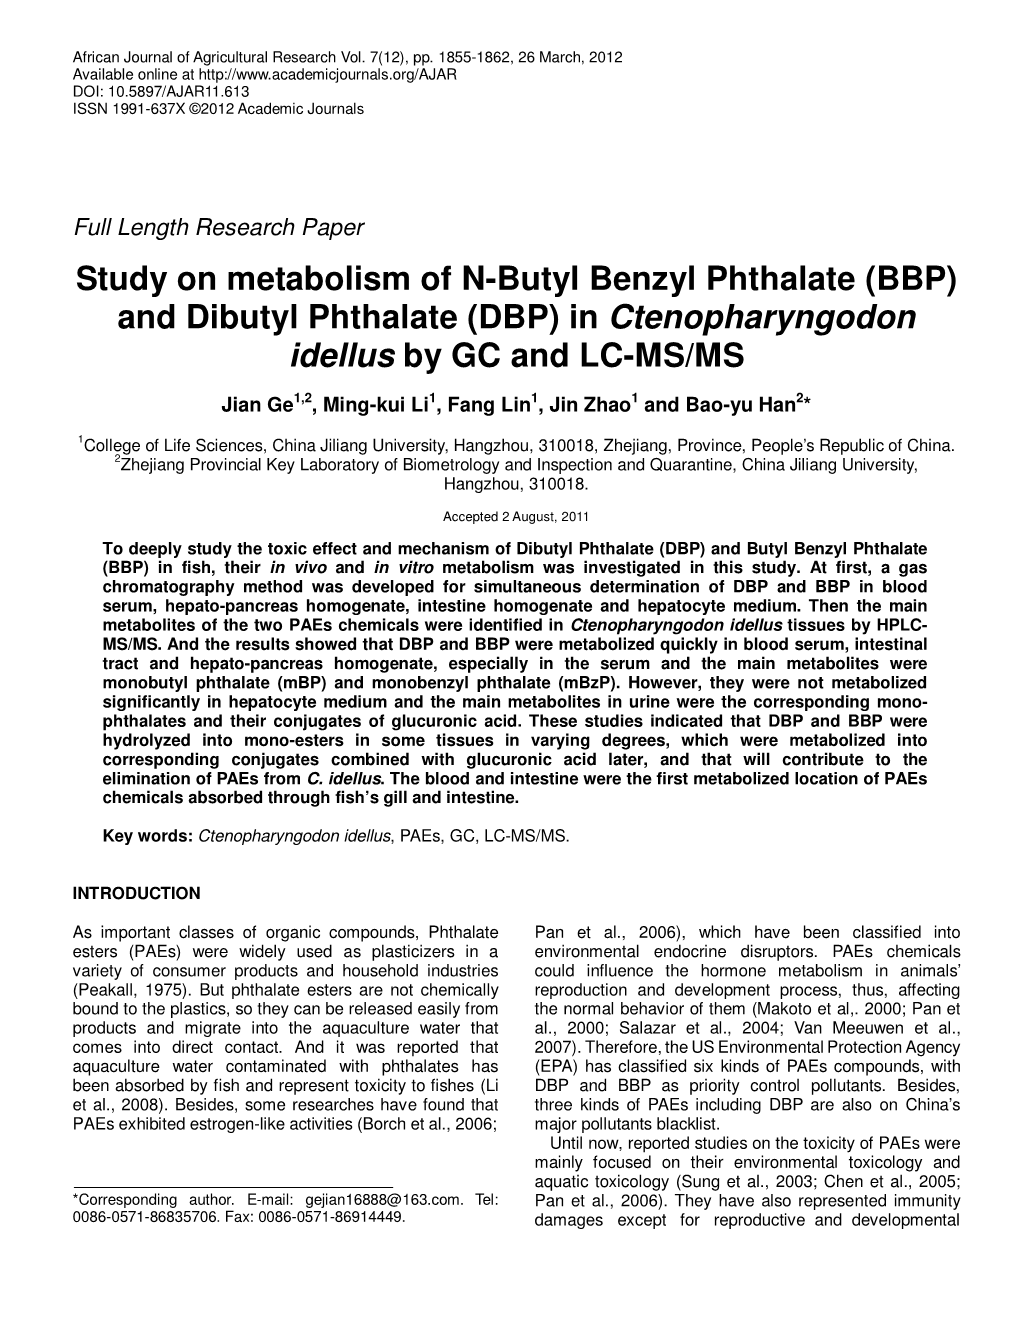 And Dibutyl Phthalate (DBP) in Ctenopharyngodon Idellus by GC and LC-MS/MS